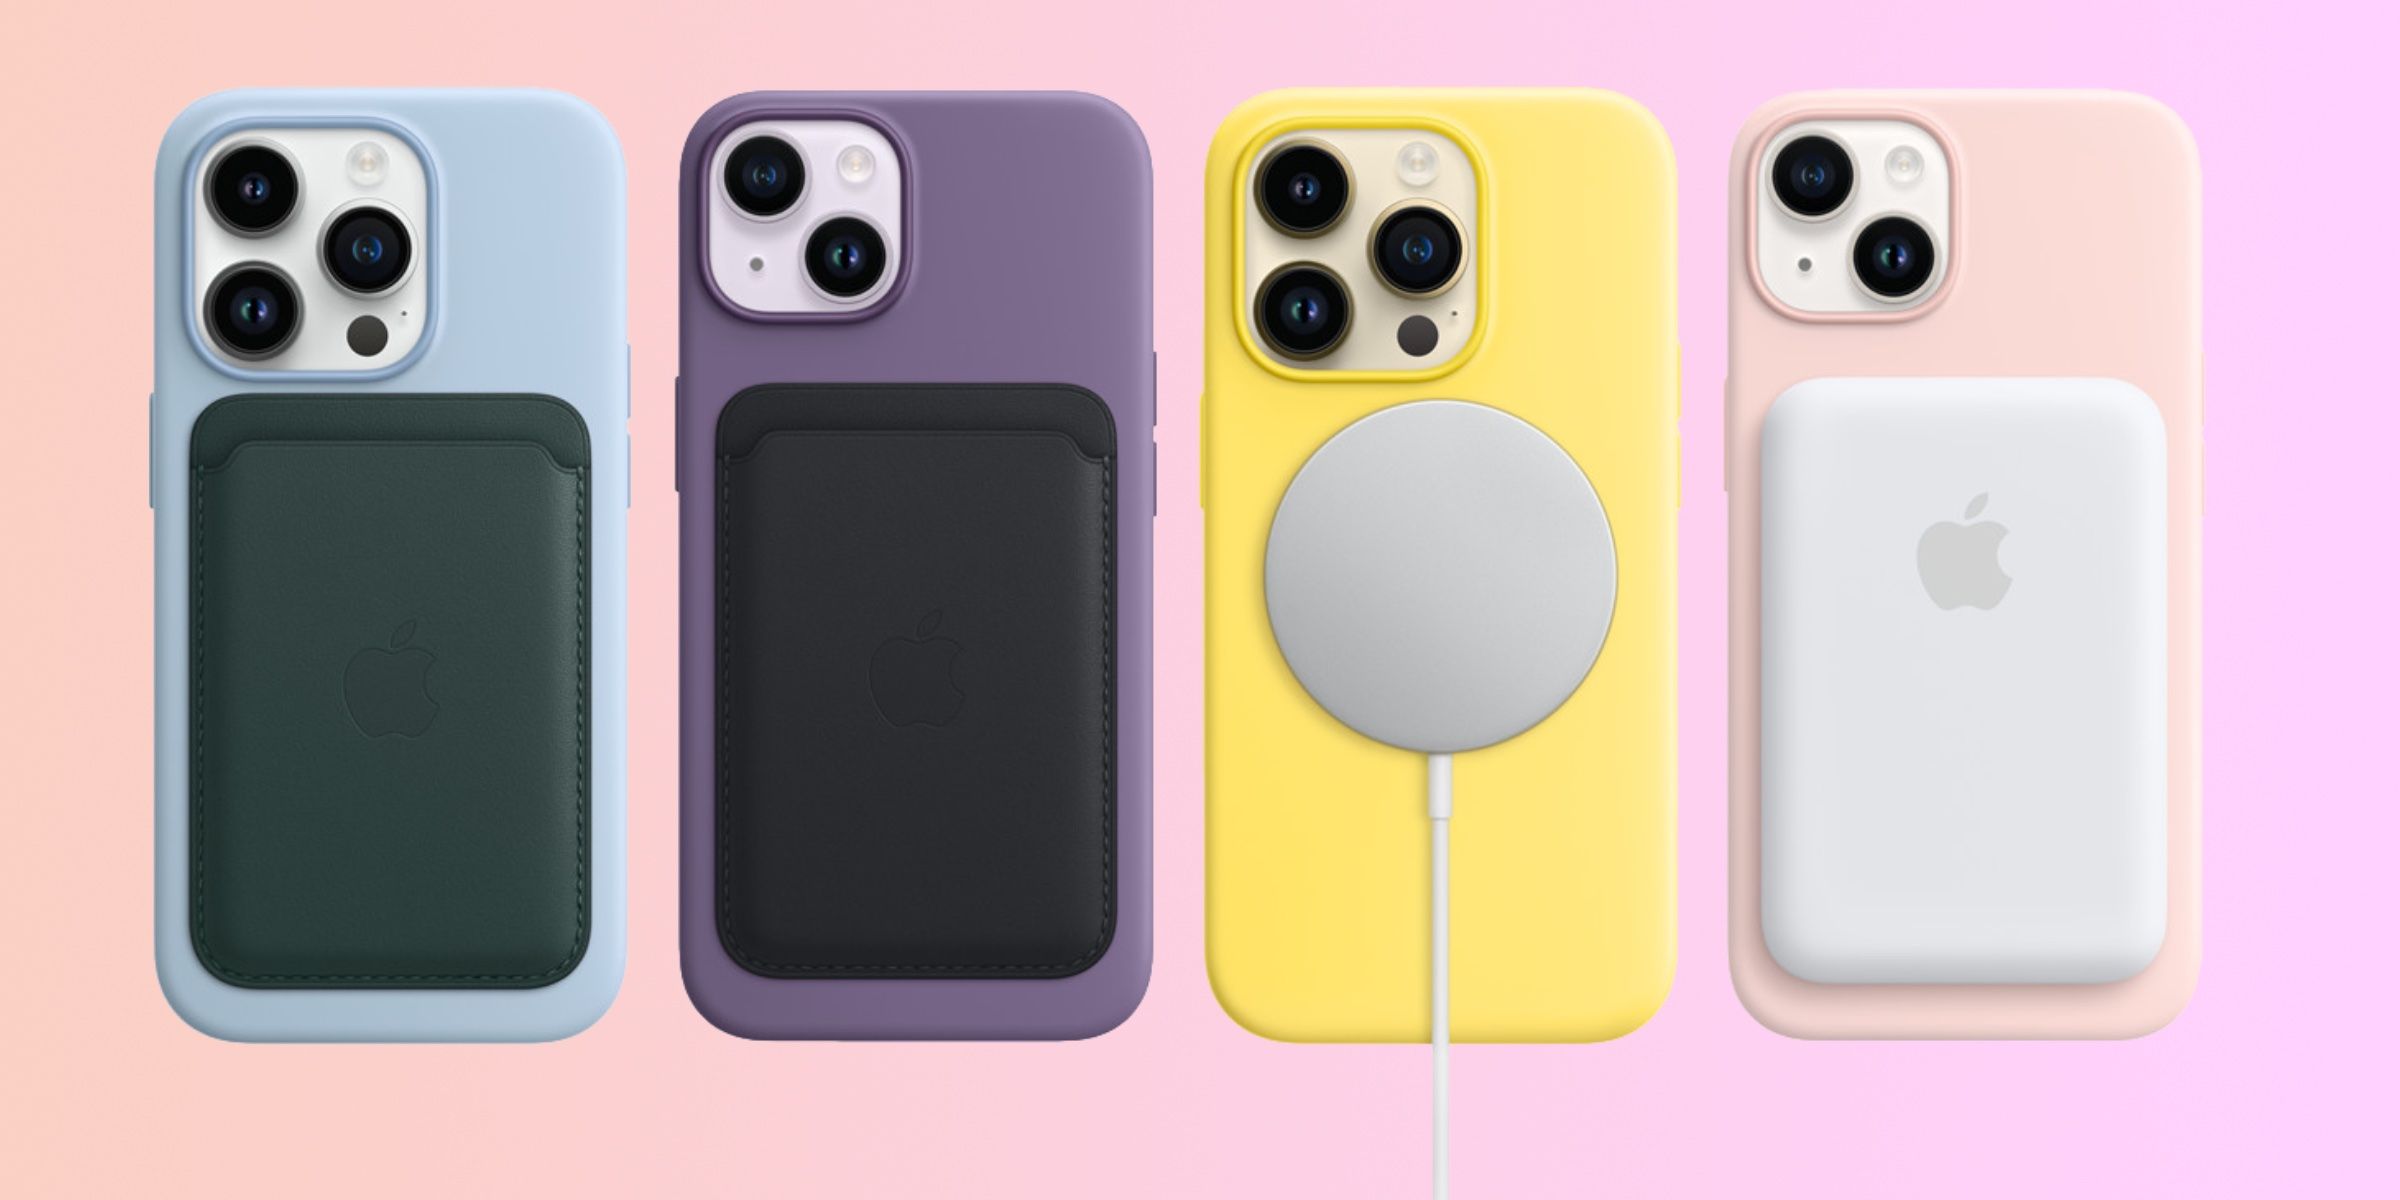 Apple's spring iPhone cases with MagSafe accessories.